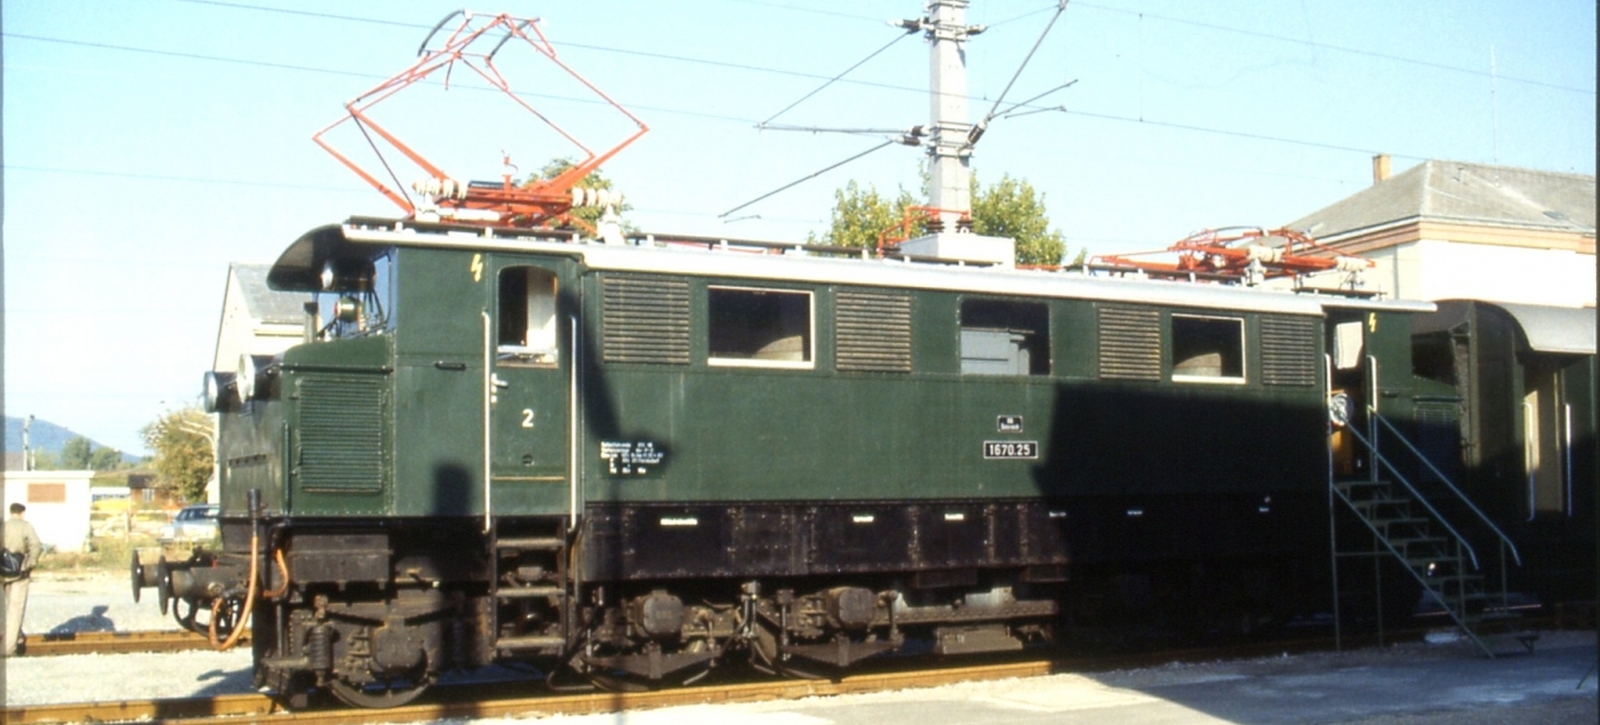 1670.25 at the 1984 ÖBB open day